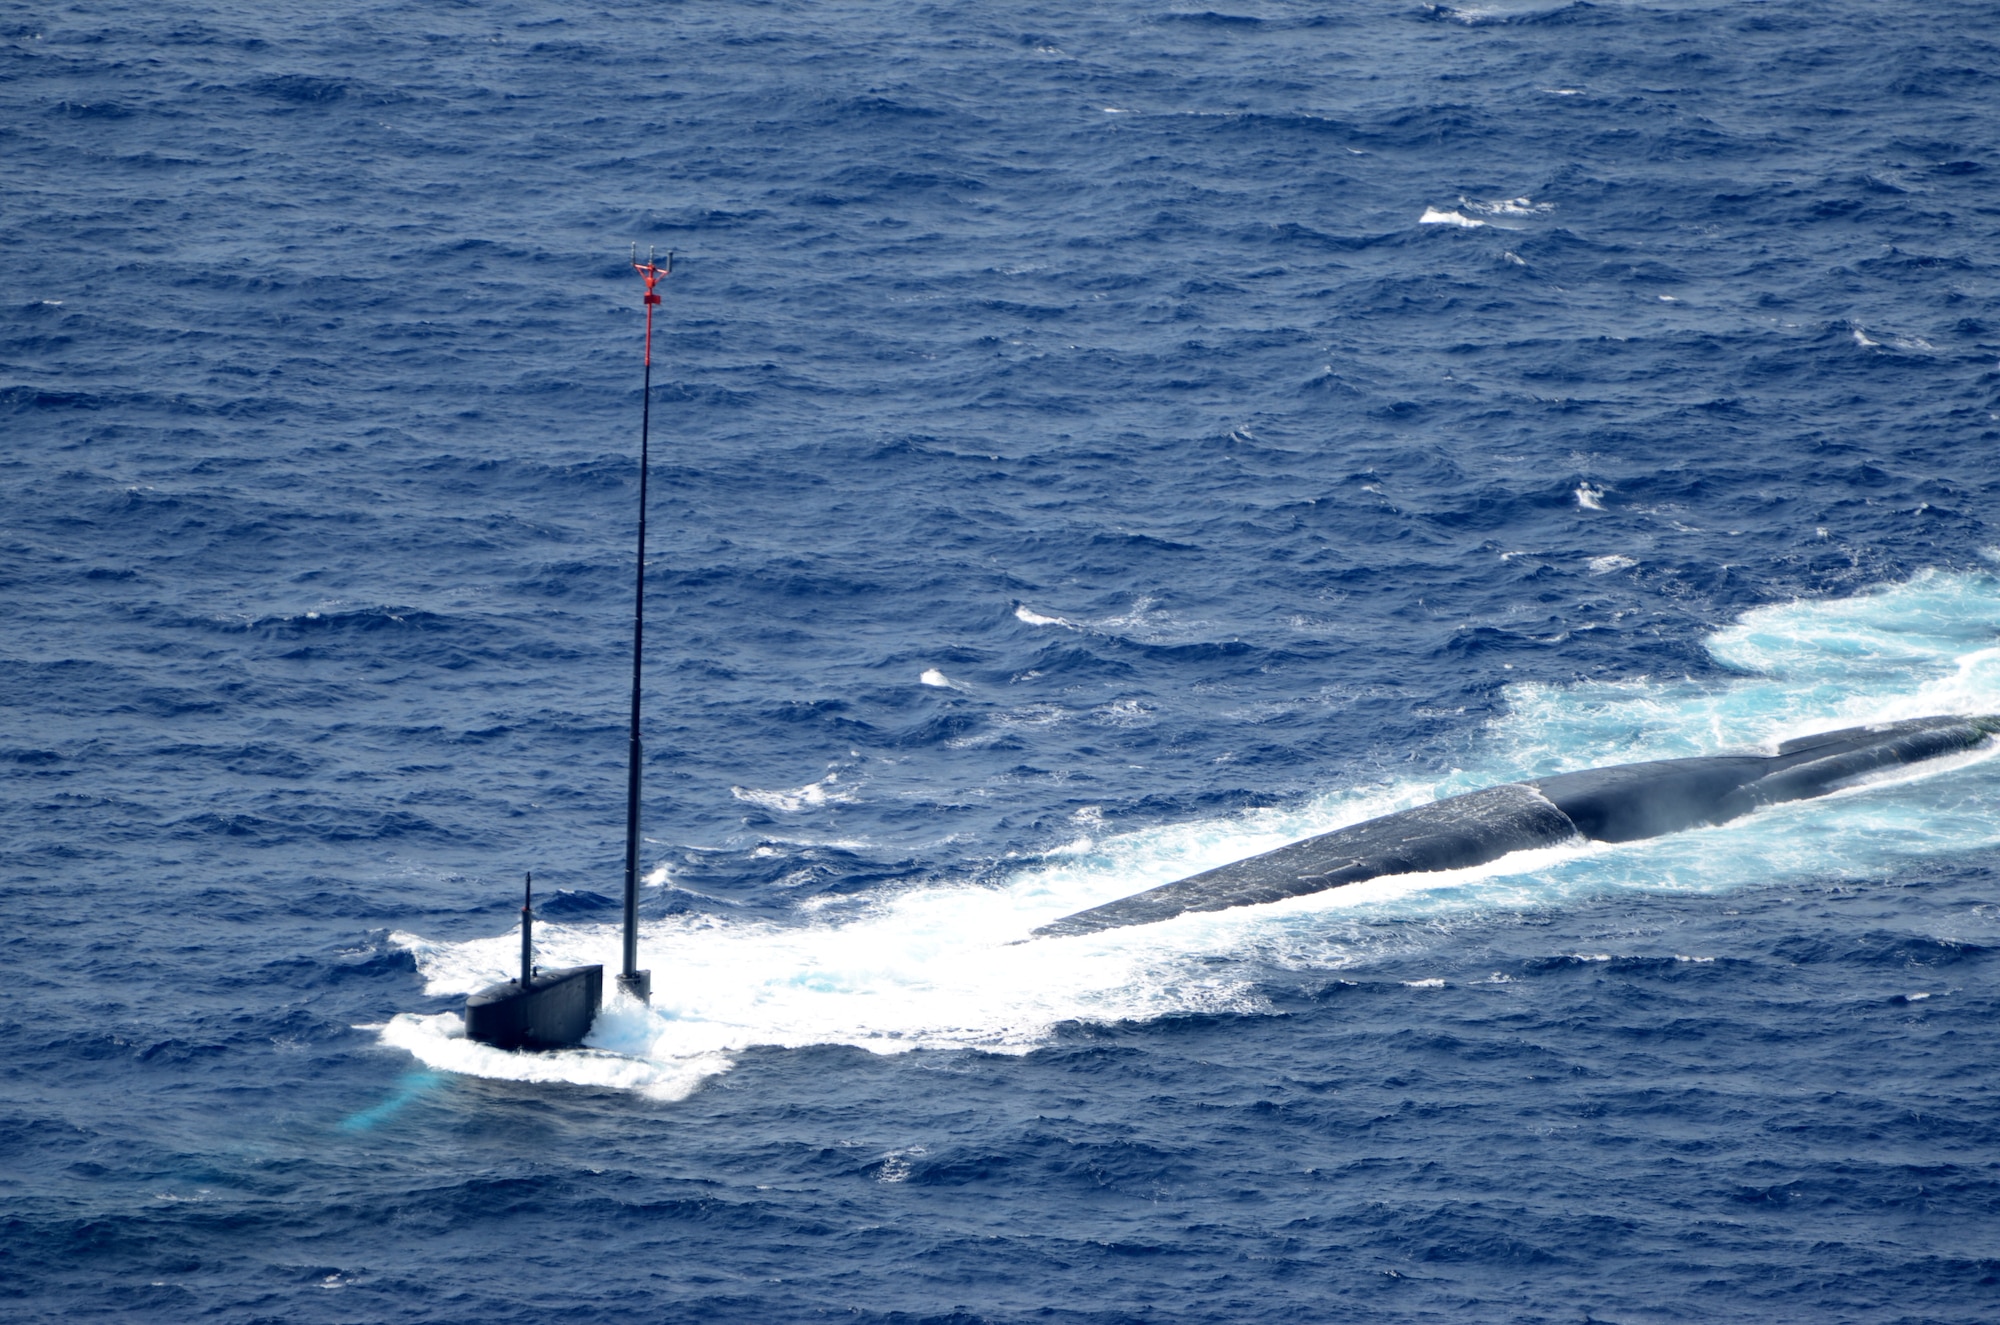 On 22 Feb, the USS Tennessee, a Naval Ohio-class ballistic missile submarine, underwent demonstration and , shakedown operations (DASO) and successfully fired an D-5 Trident test missile off the coast of Cape Canaveral, Fla. Prior to sub submerging, Airmen of the 920th Rescue Wing, at nearby Patrick Air Force Base, cleared the launch path beneath the missile of mariners to allow a safe test. (U.S. Air Force photo/Capt. Cathleen Snow)